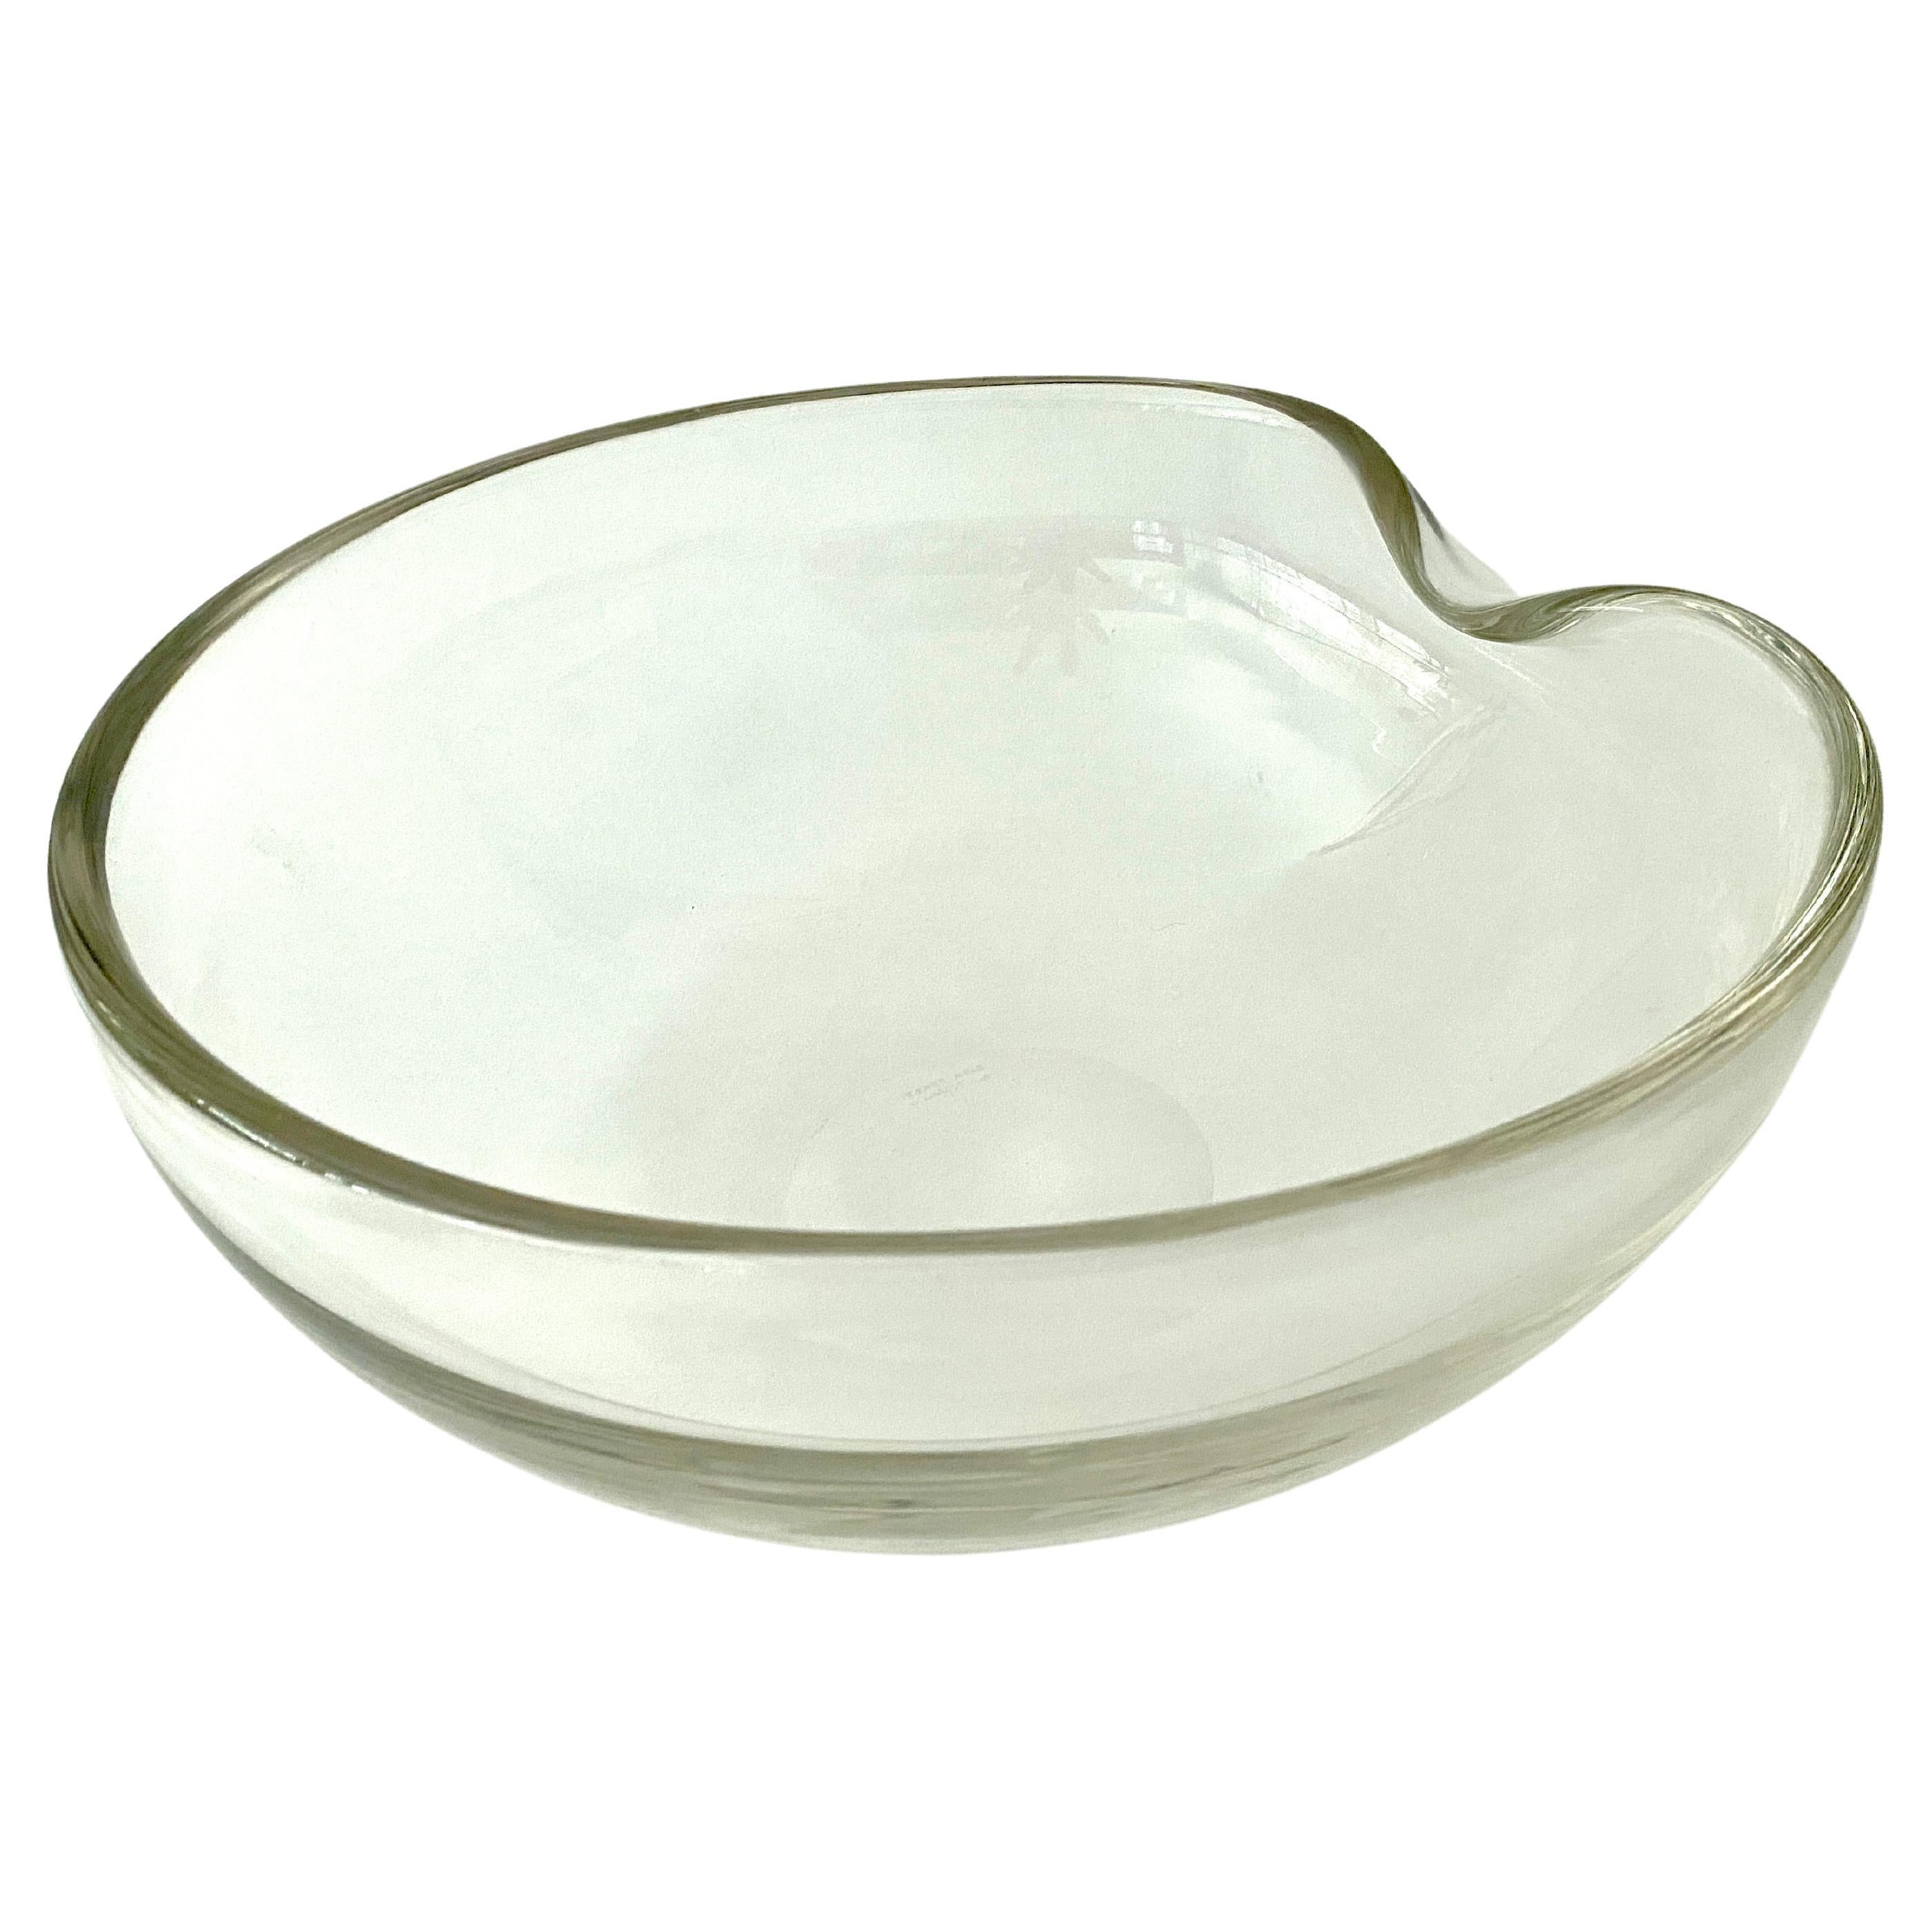 Clear Crystal Tumb Print Bowl Designed by Elsa Peretti for Tiffany For Sale